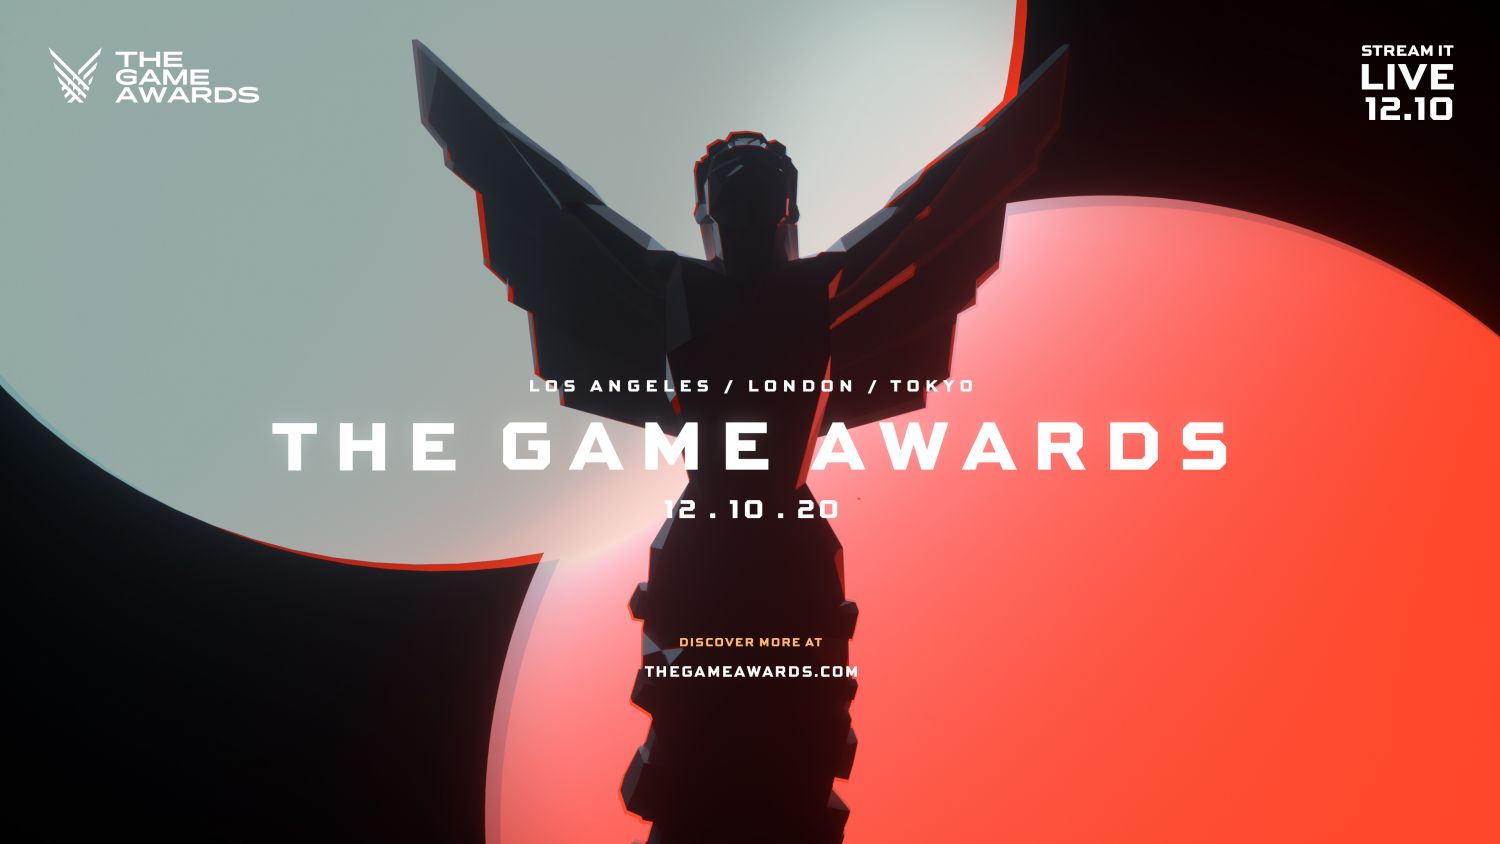 The Game Awards will feature live audio description for the first time